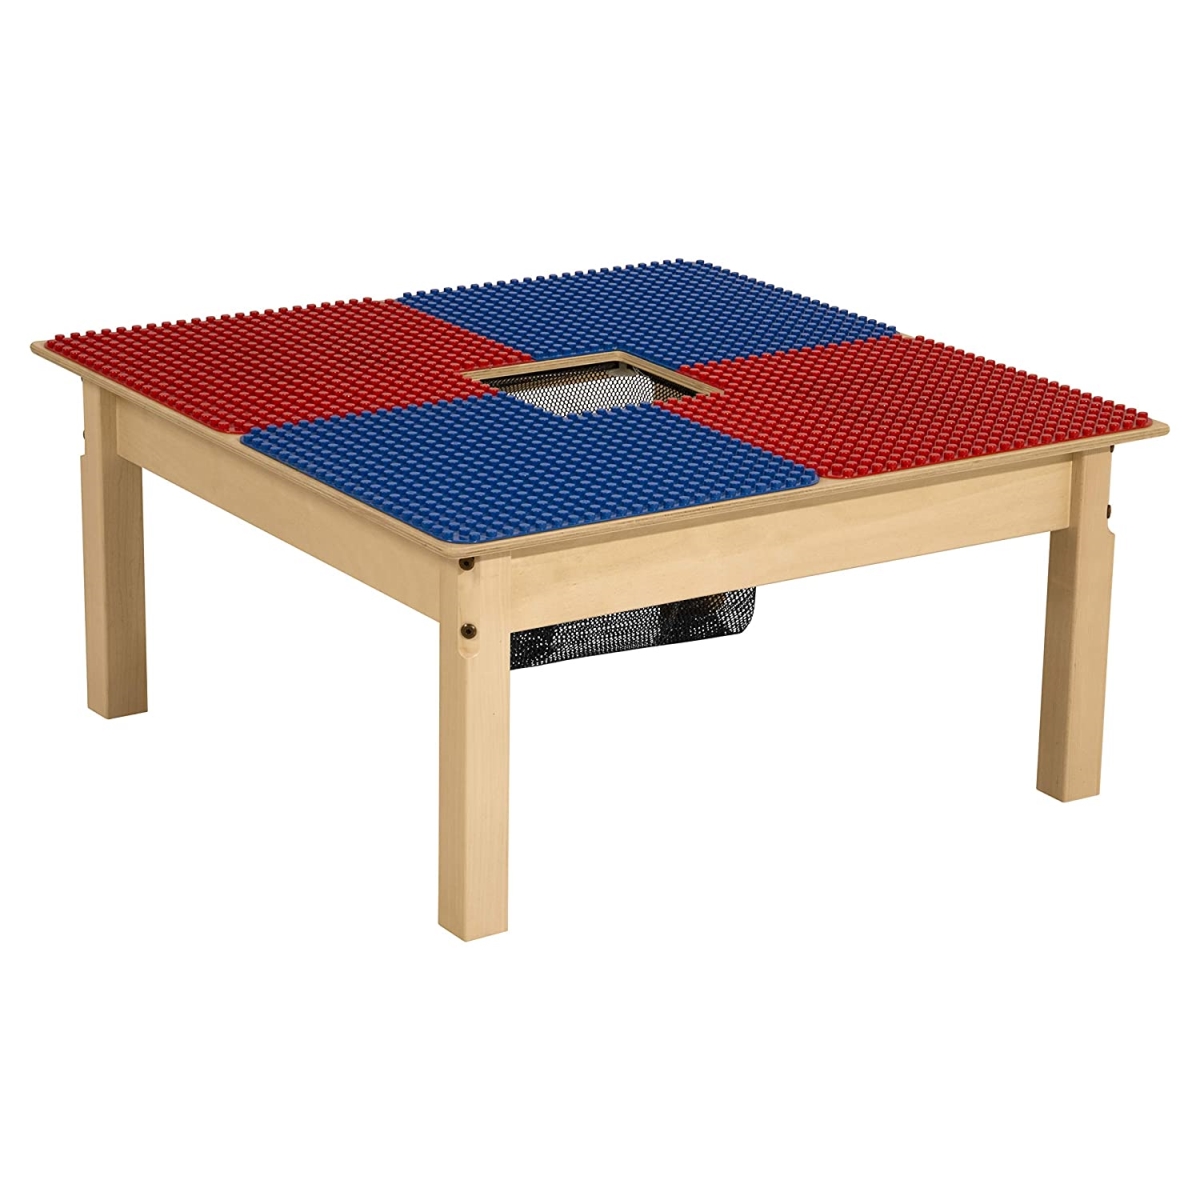 Tp3131pgn18-br 18 In. Duplo Compatible Table With Legs, Blue & Red - Square